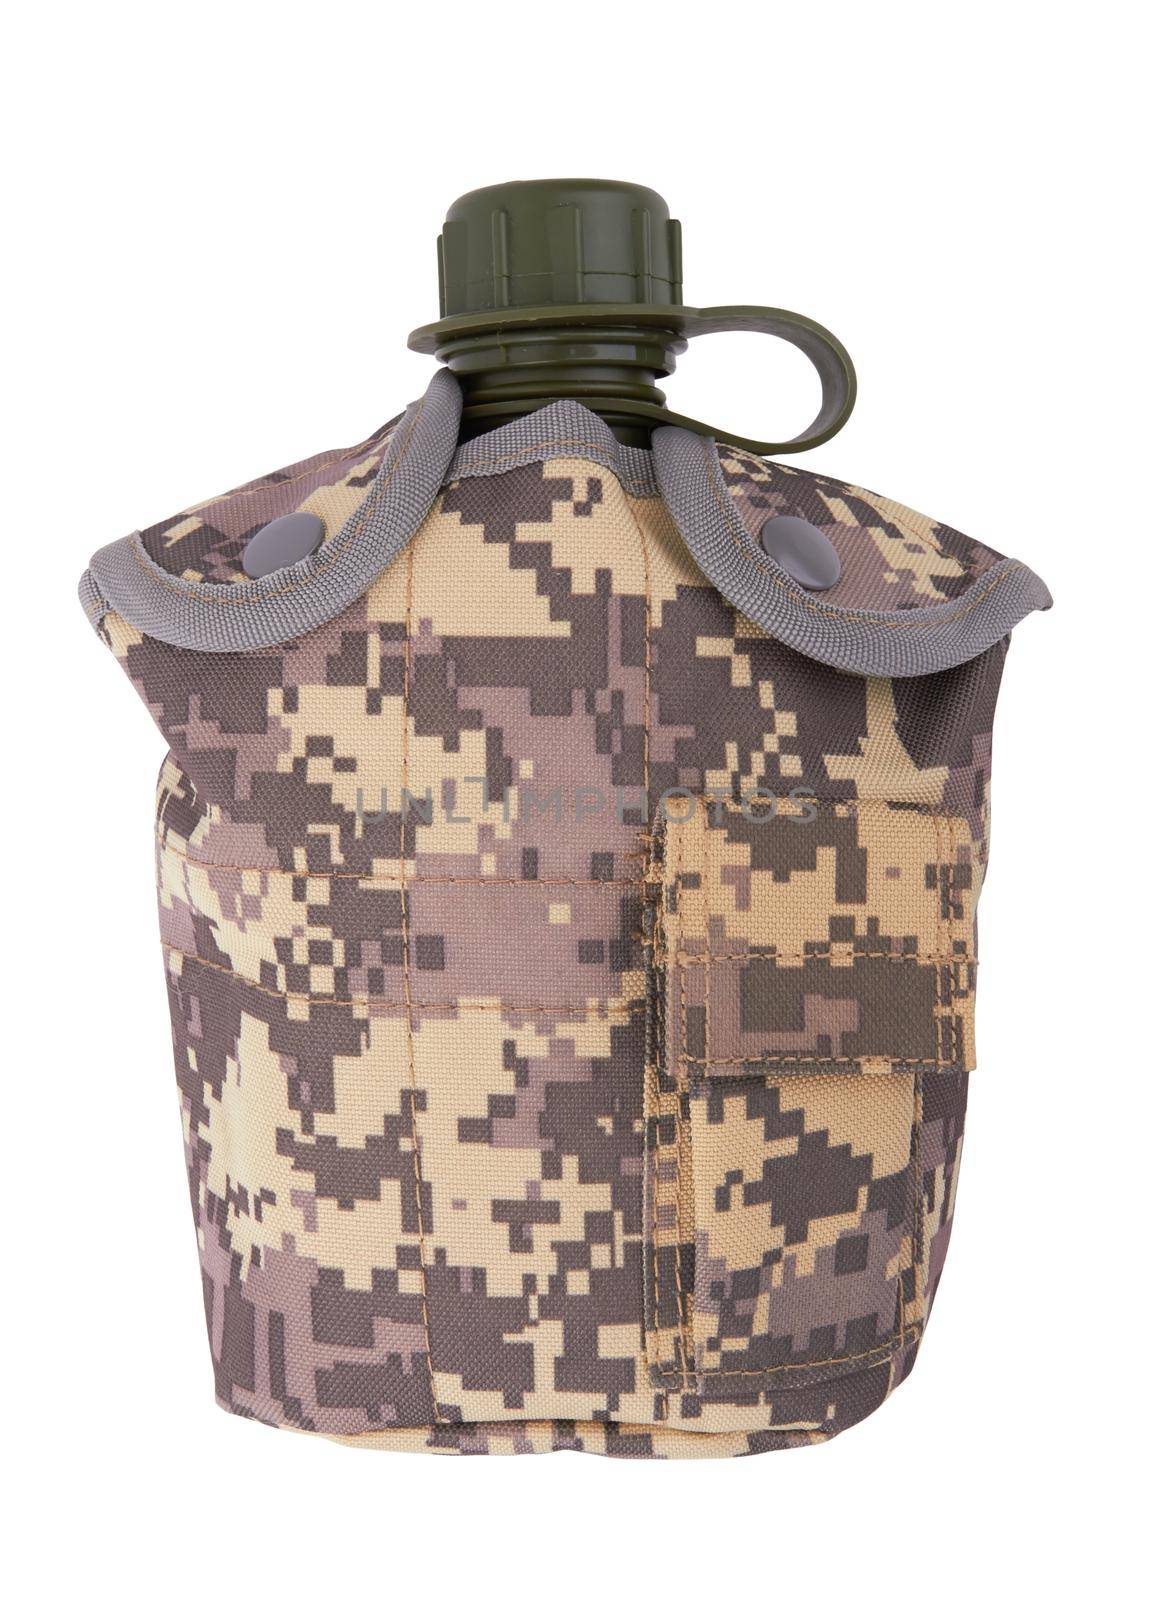 Army water canteen isolated on a white background